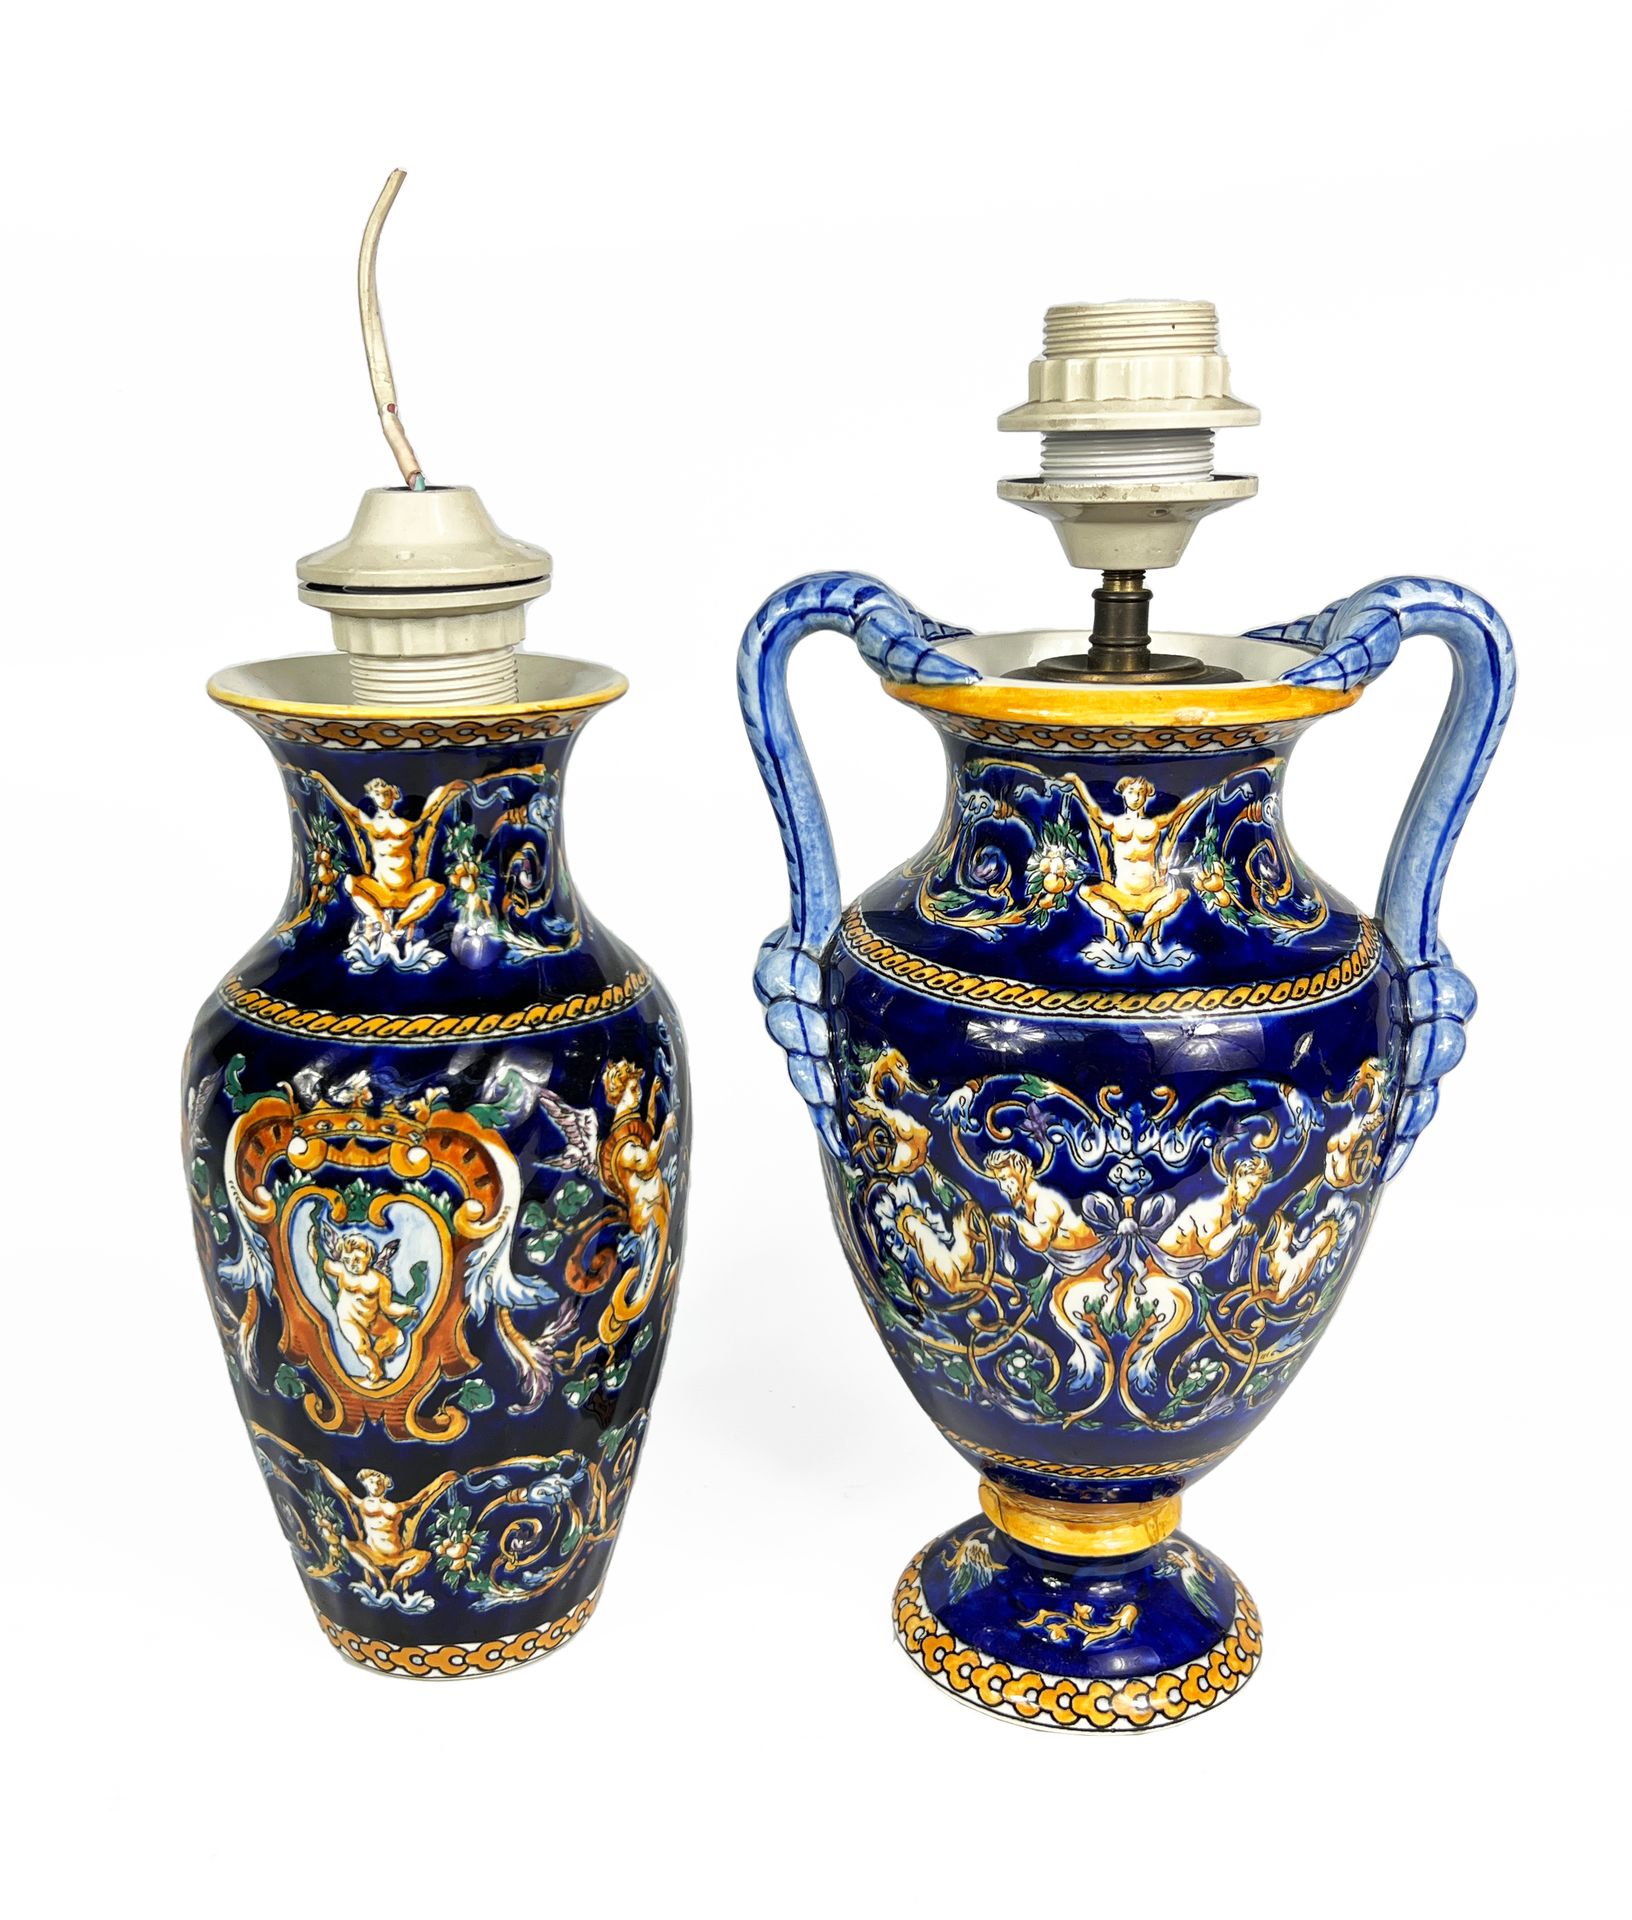 Null GIEN, XXth century

Set of two earthenware vases mounted in lamp with Renai&hellip;